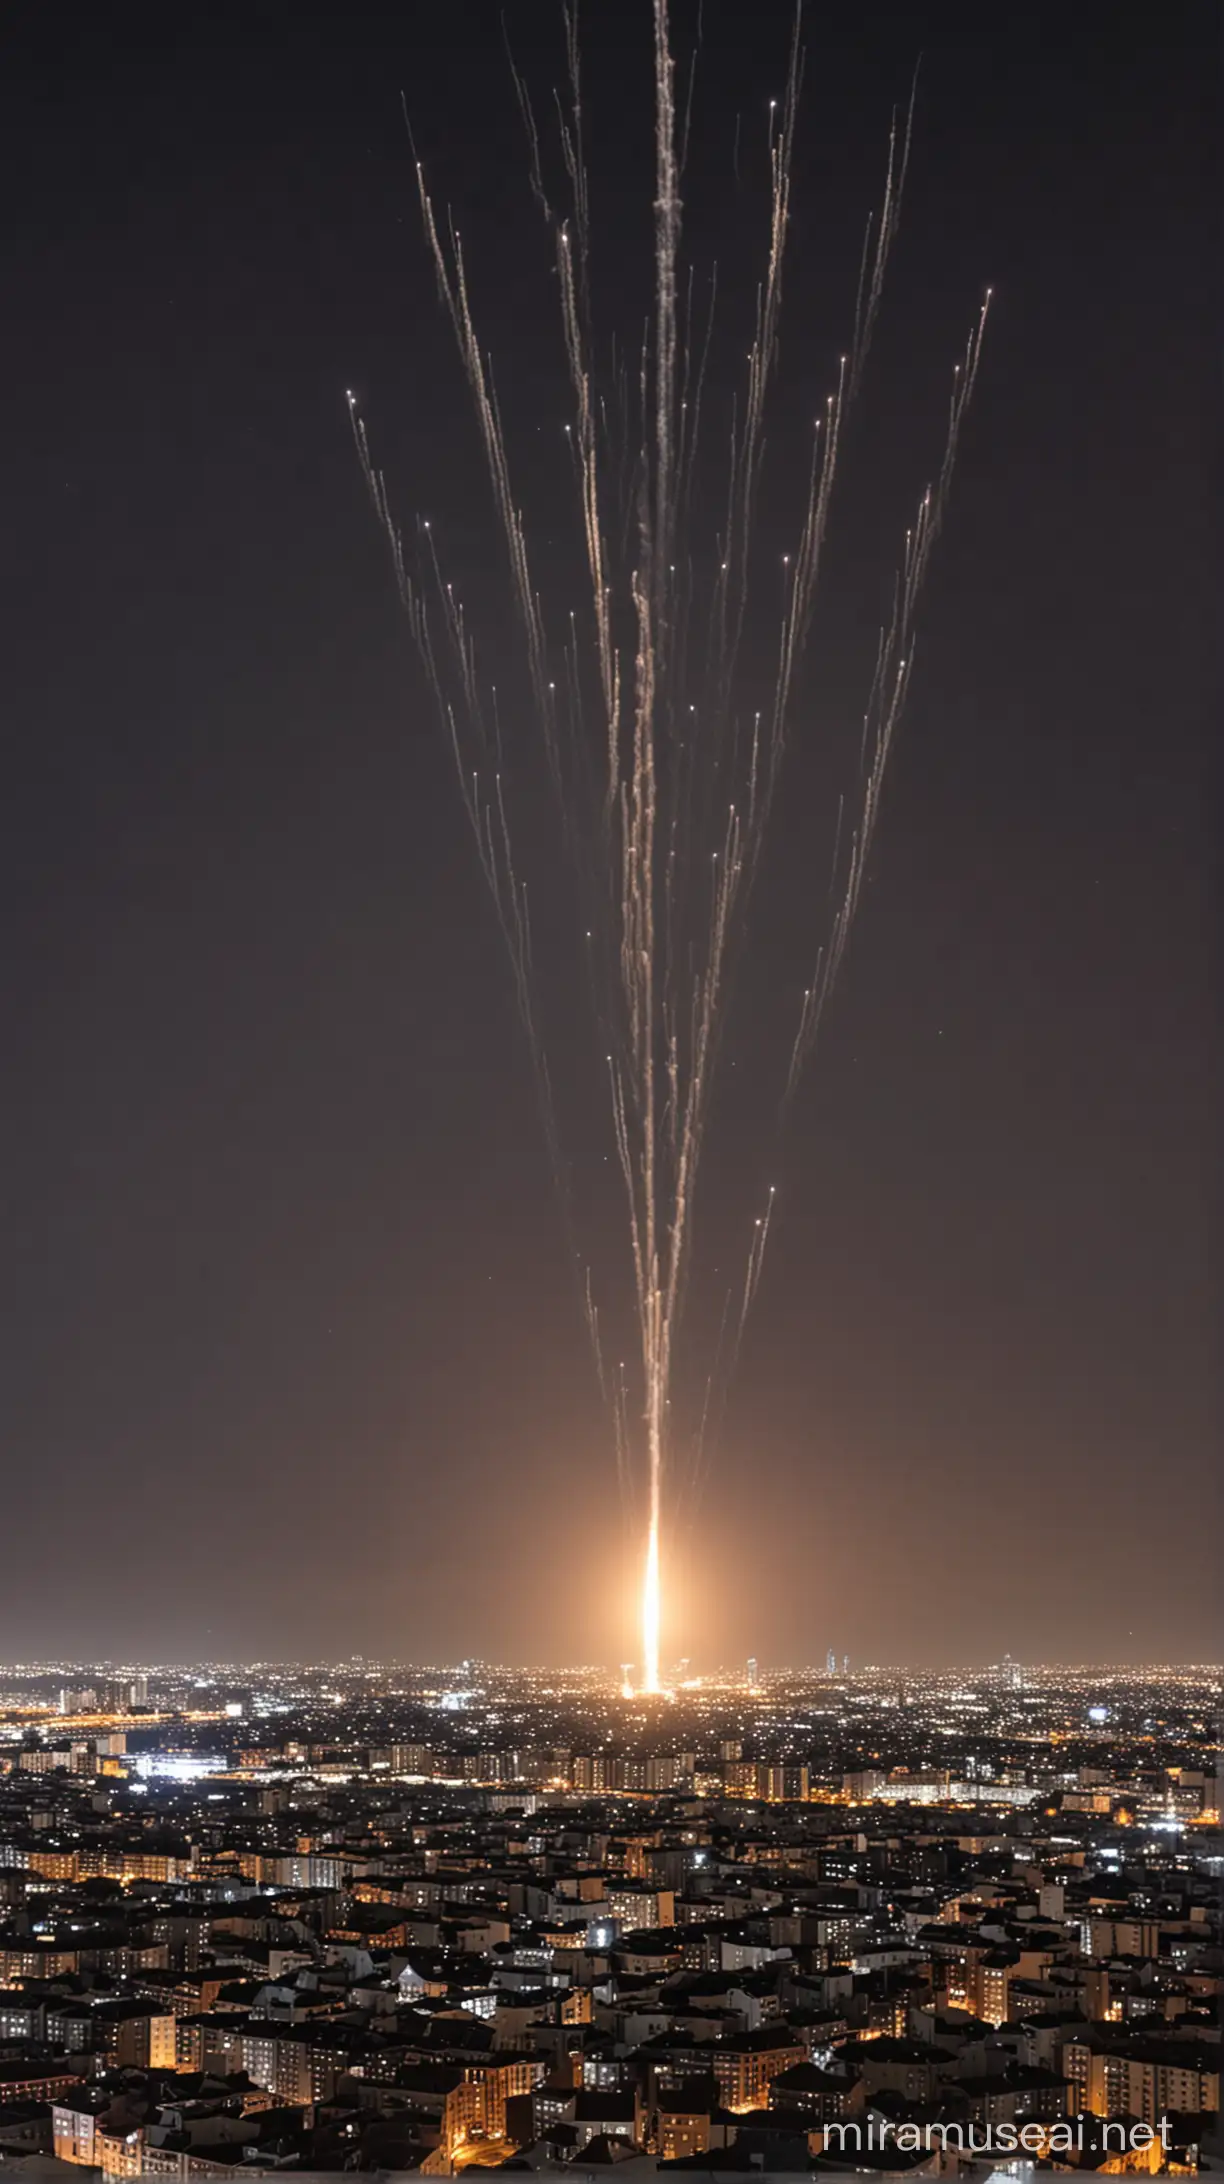 dozens of missiles over the city